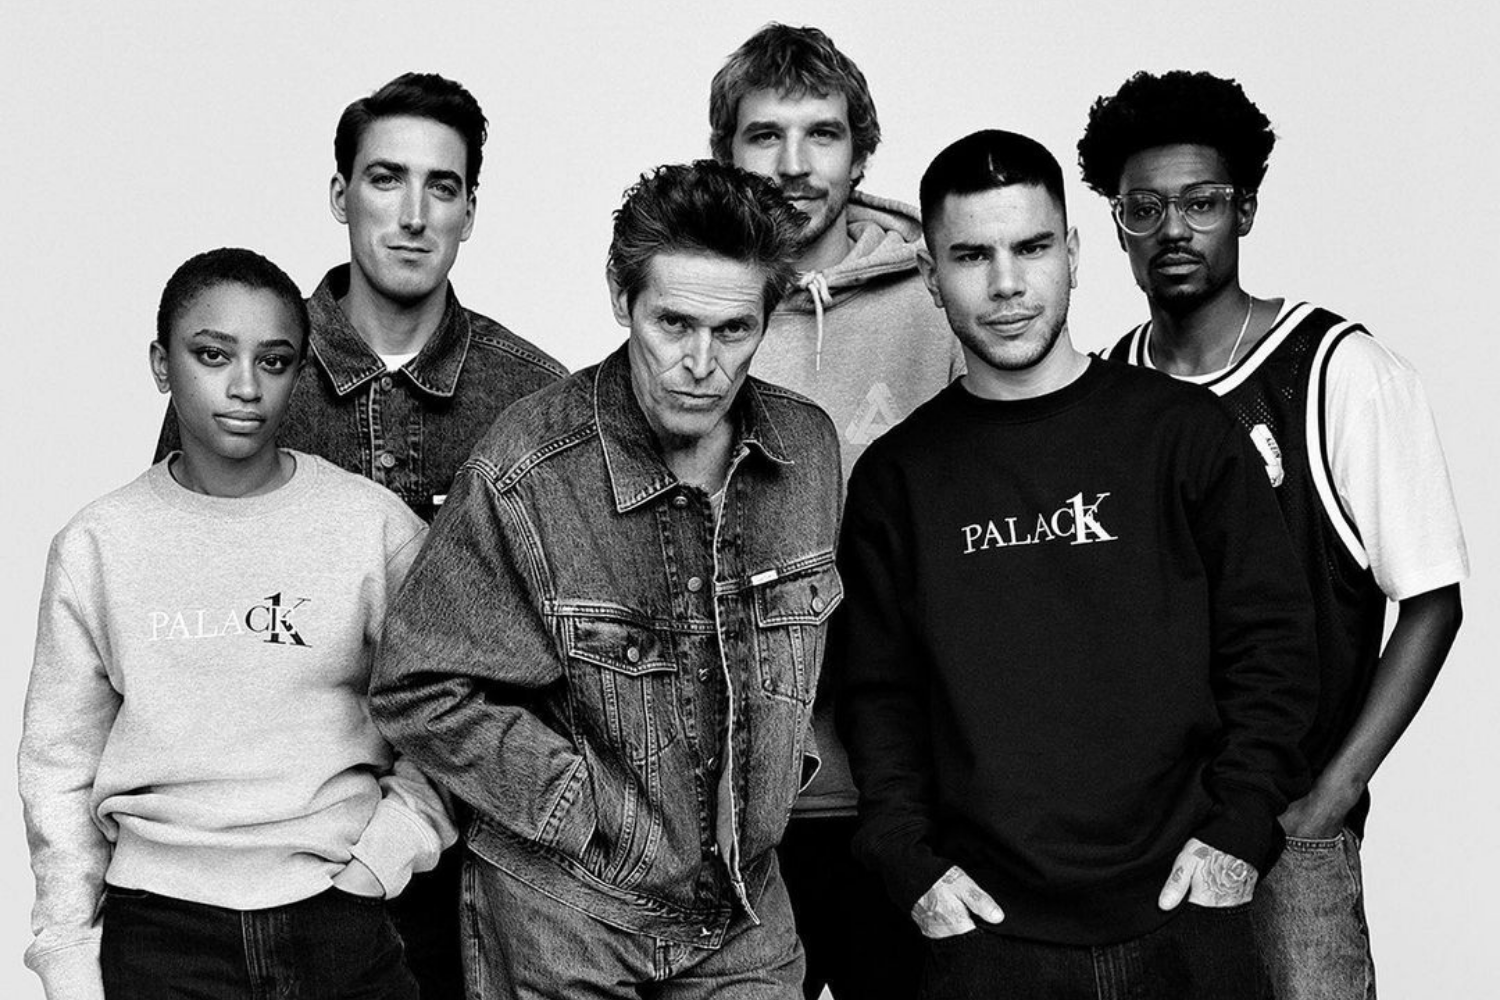 Palace and Calvin Klein release a collection together